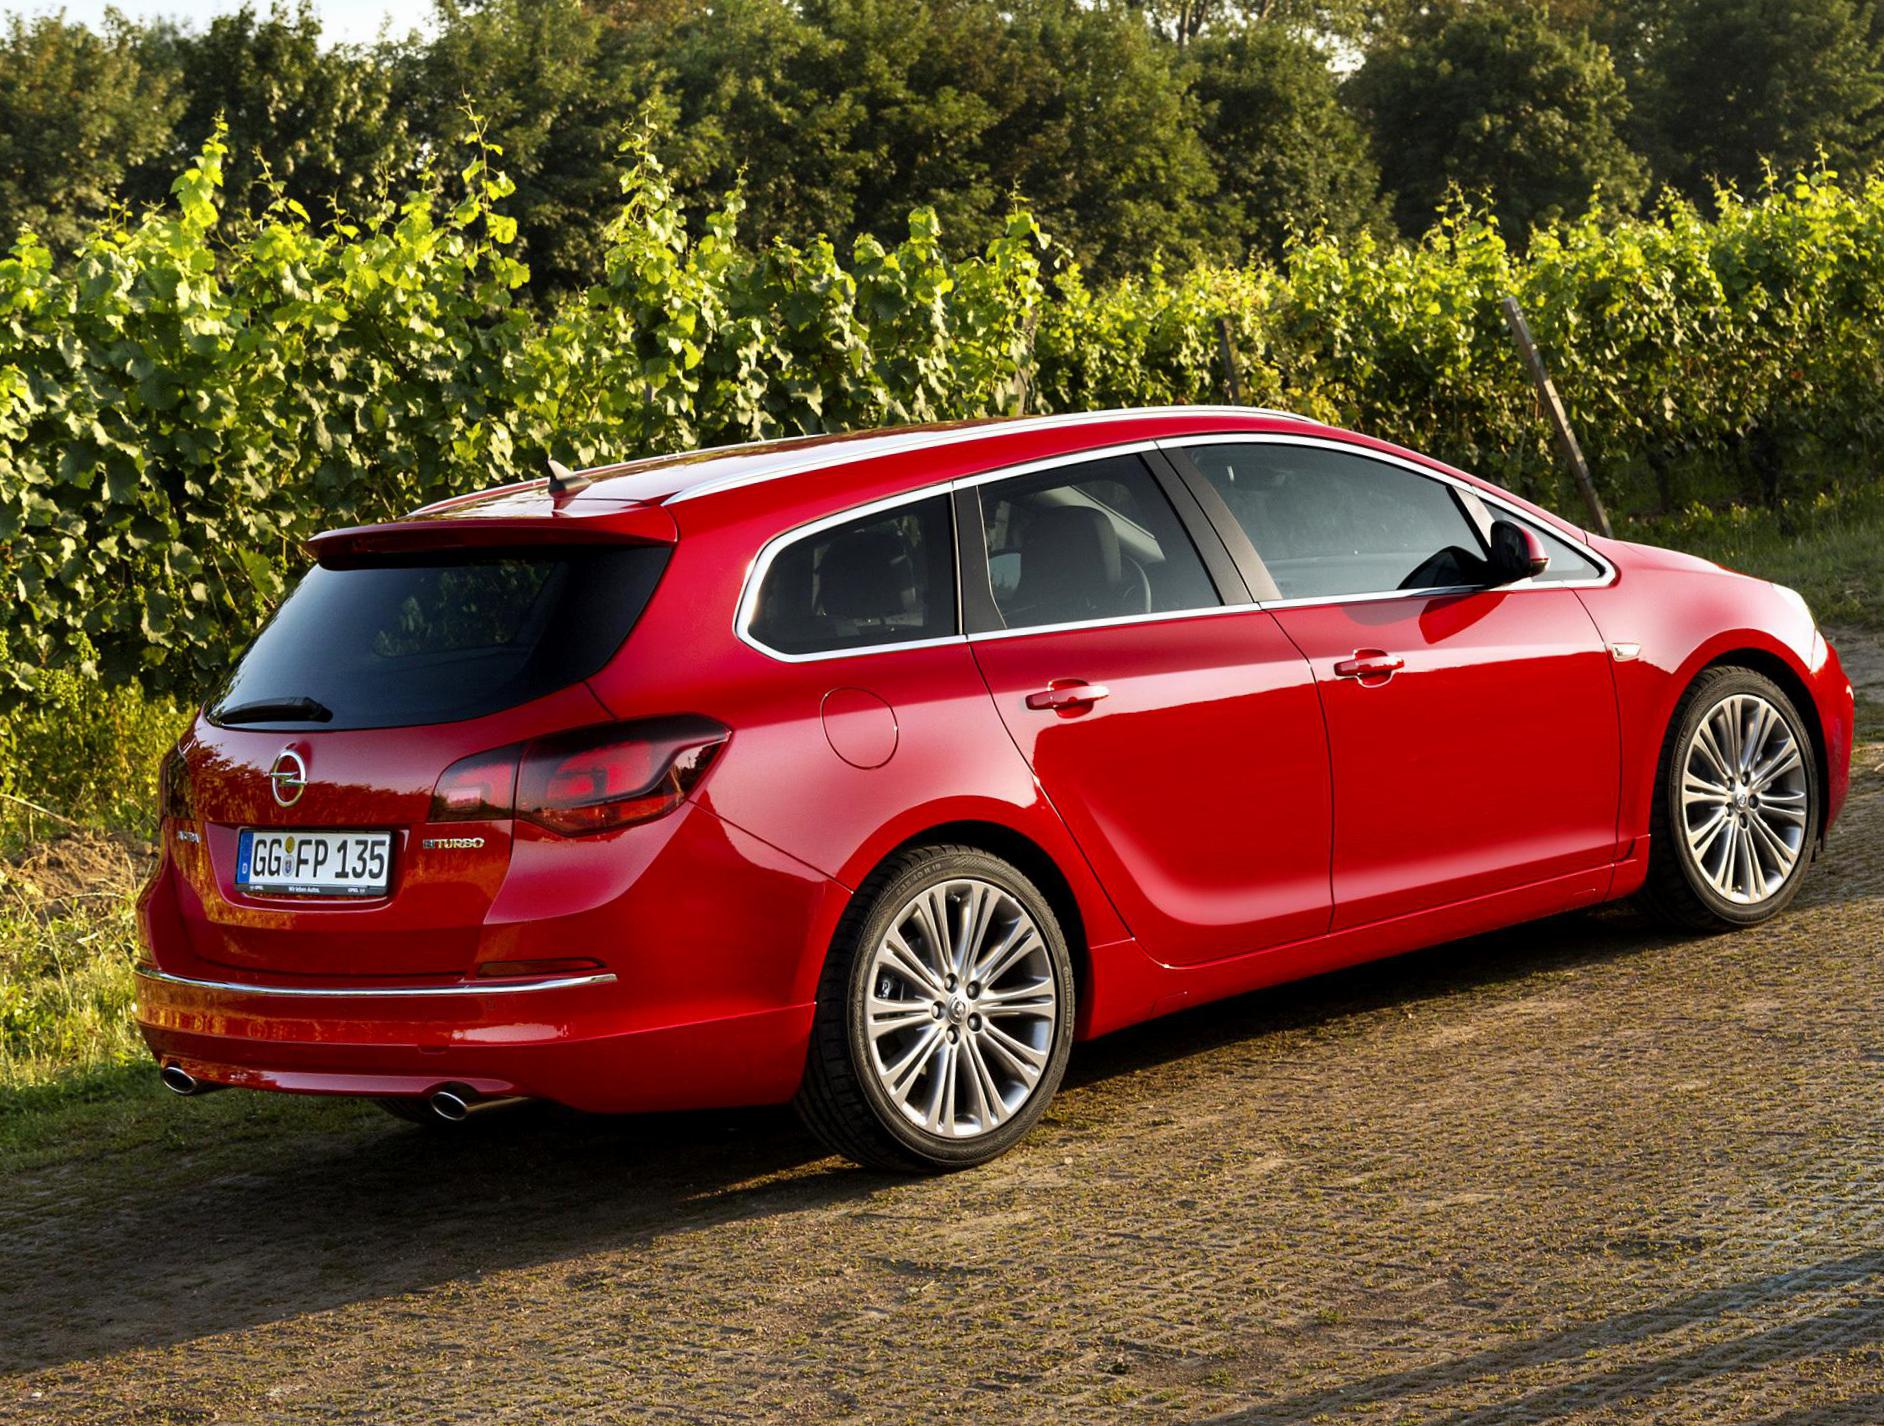 Opel Astra J Sports Tourer Photos and Specs. Photo Opel Astra J Sports